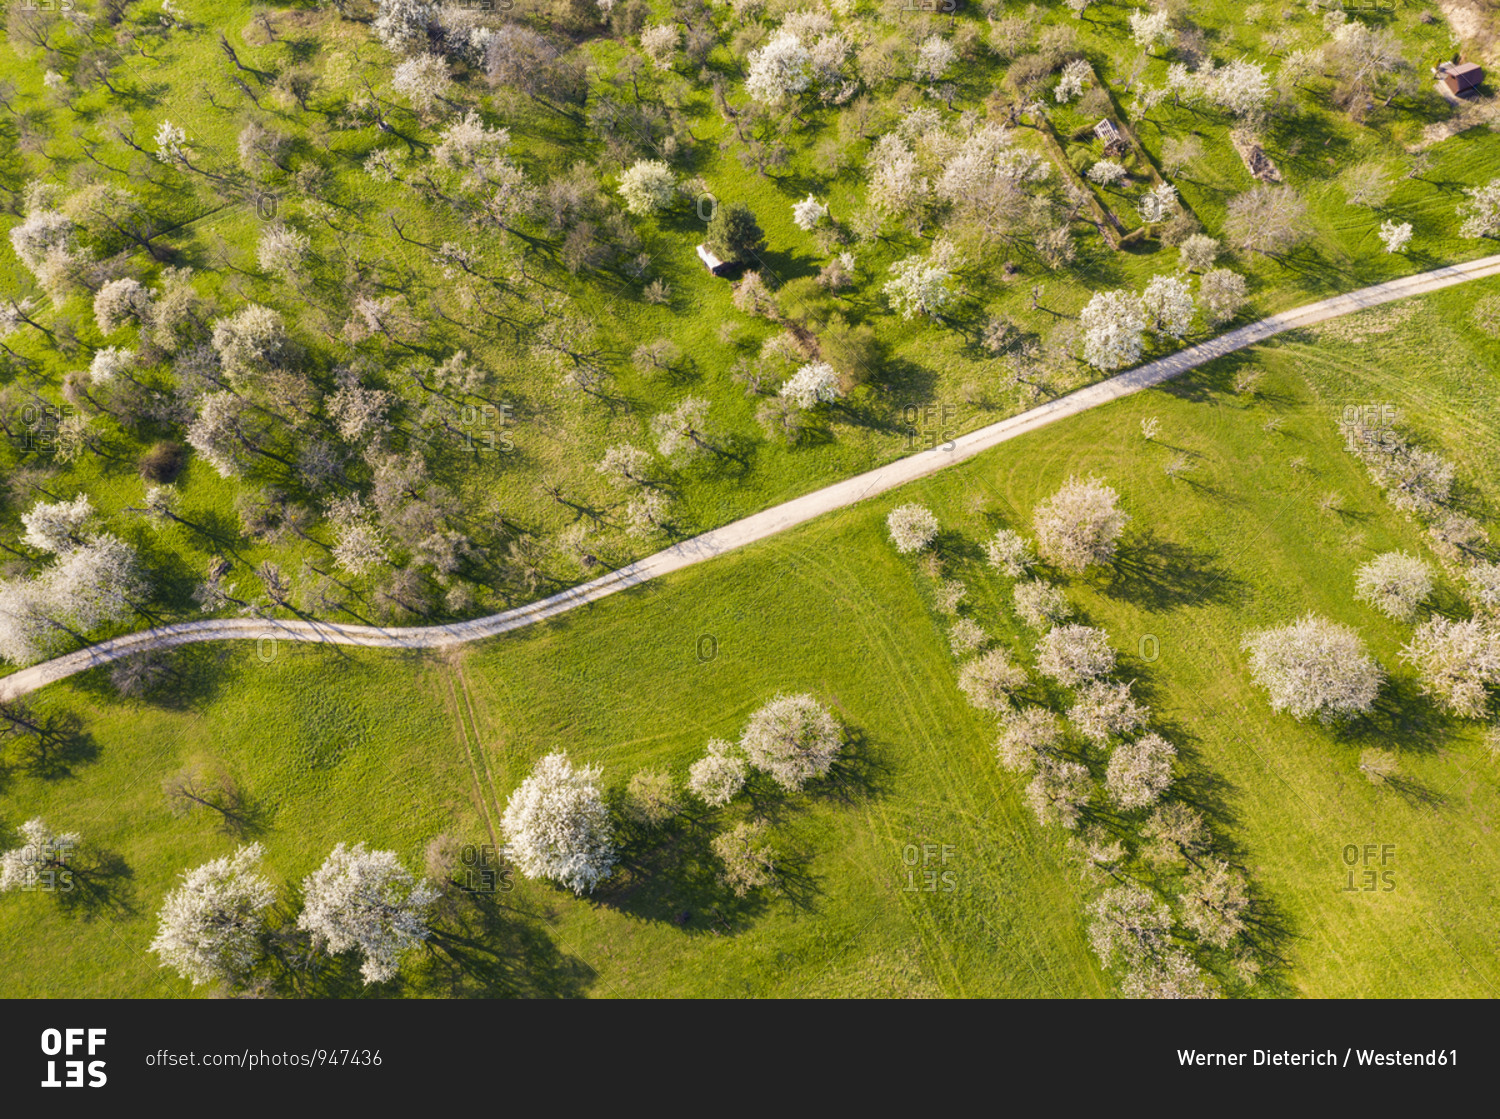 Germany- Baden-Wurttemberg- Owen- Drone view of dirt road stretching across countryside orchard in spring